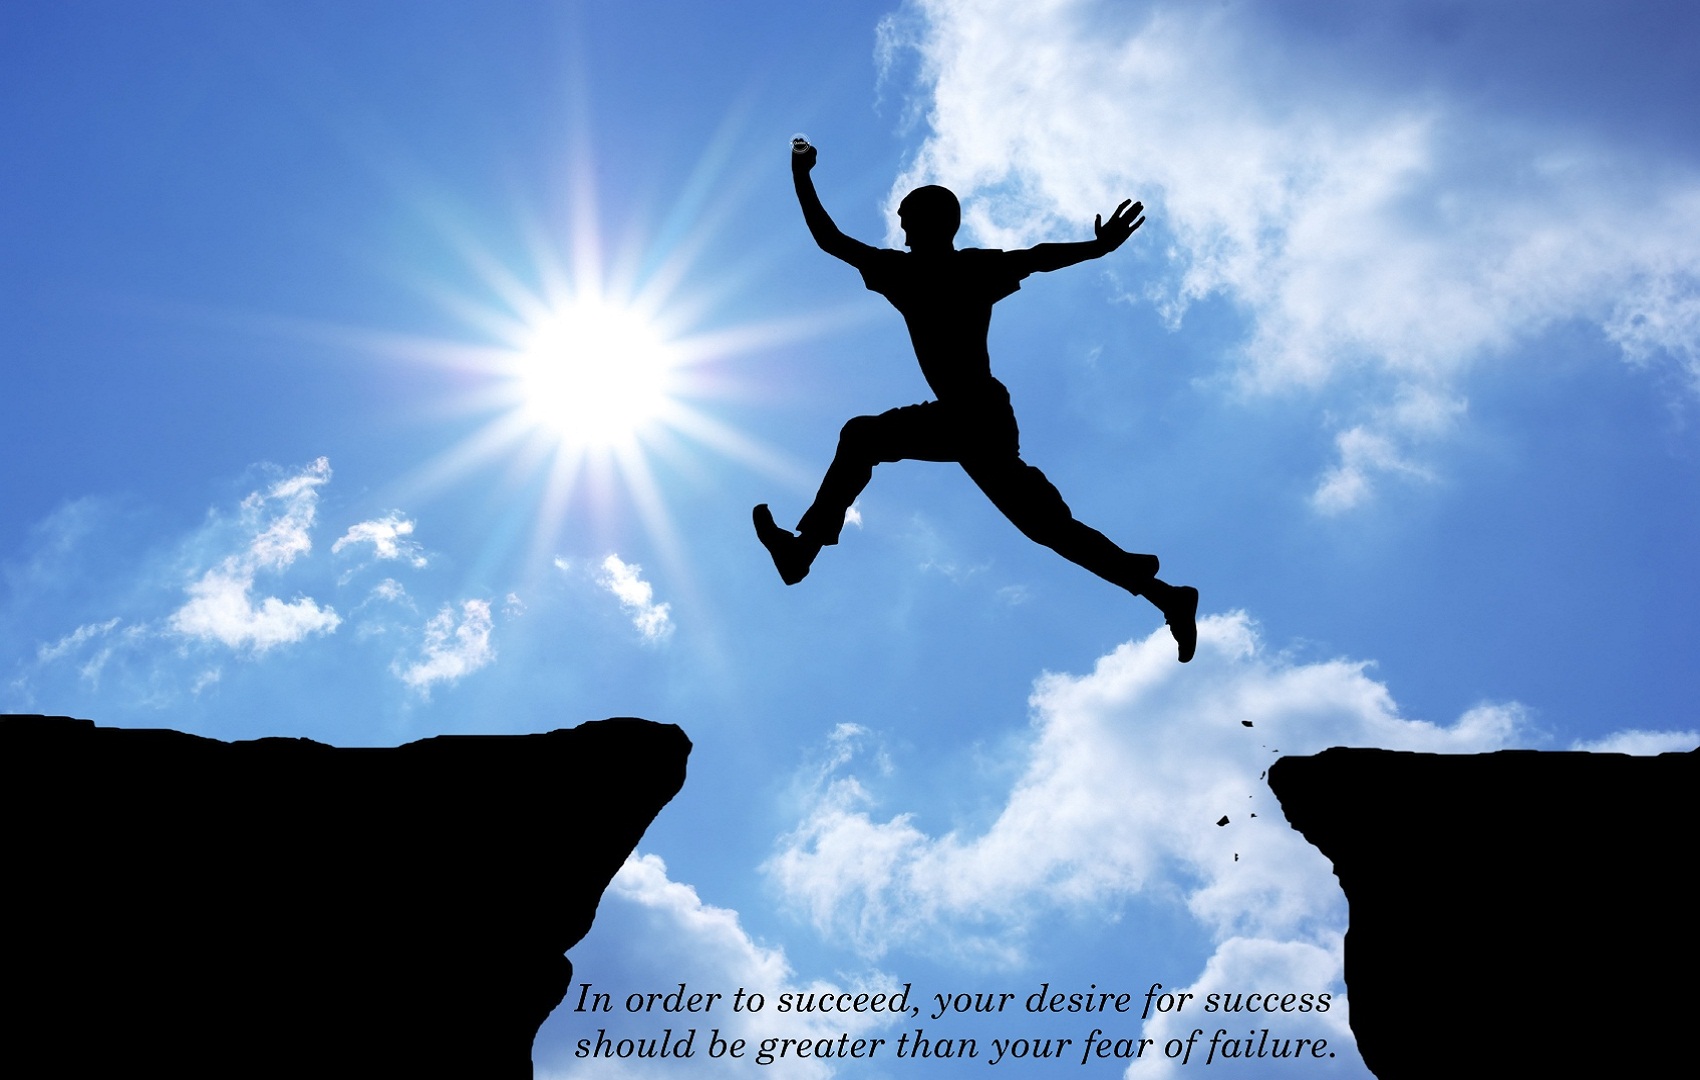 success wallpaper,people in nature,jumping,sky,happy,sports